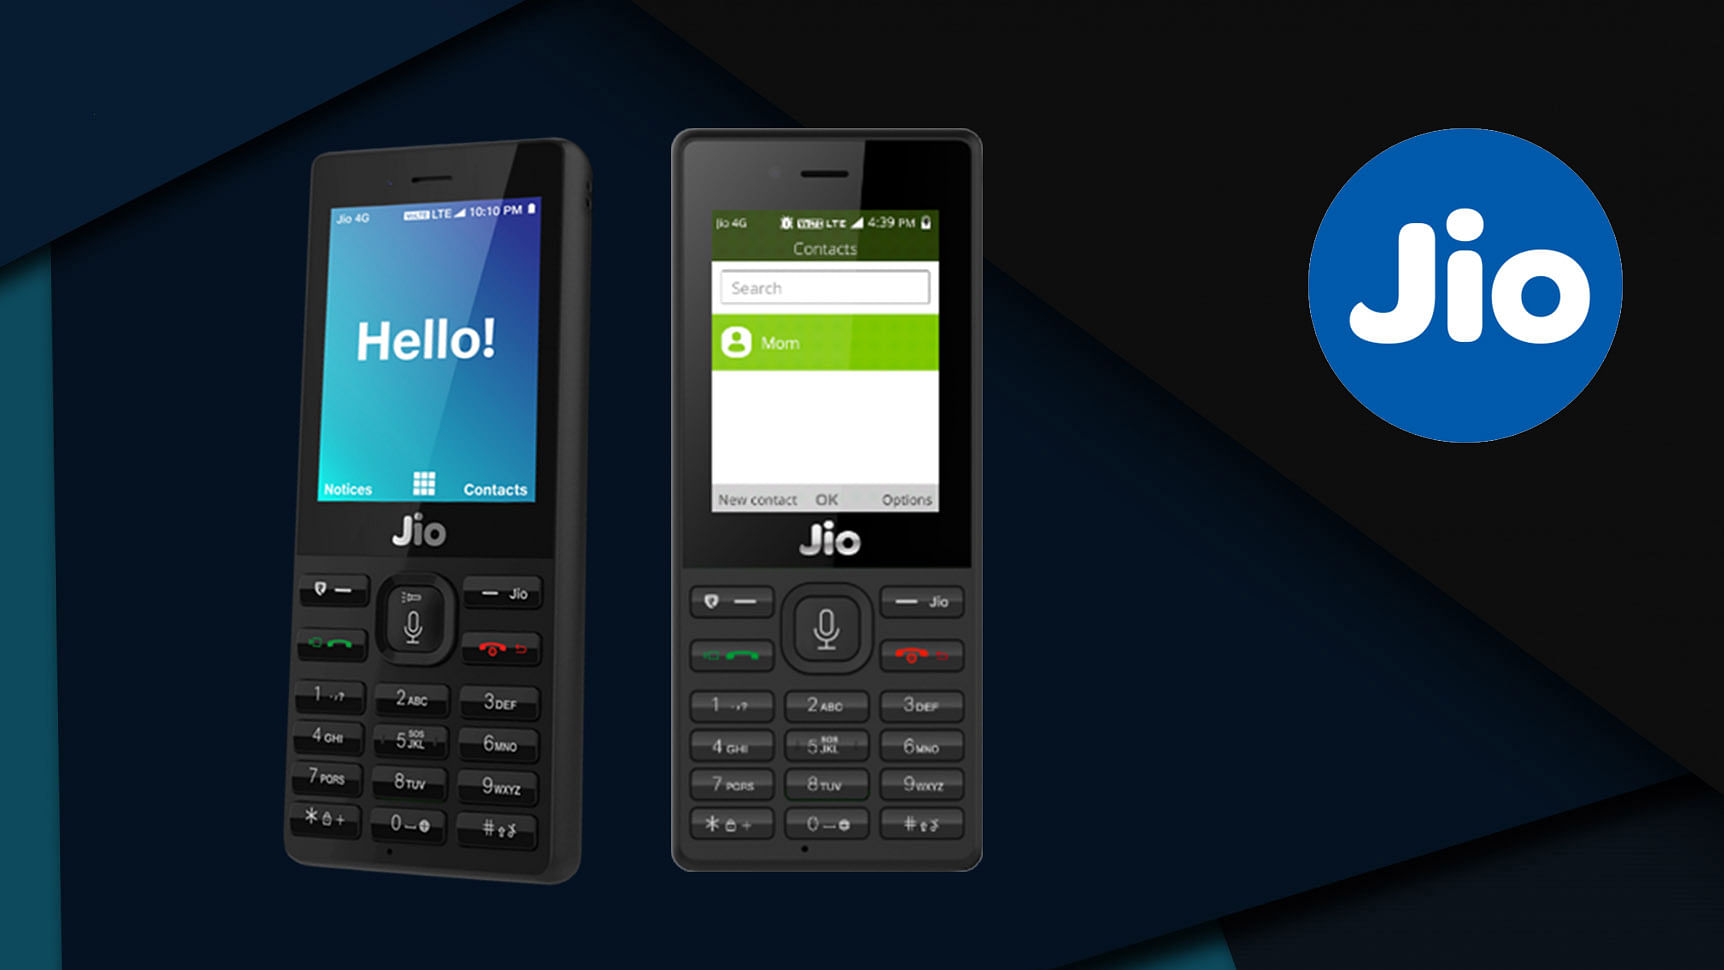 Reliance JioPhone isn’t free after all?